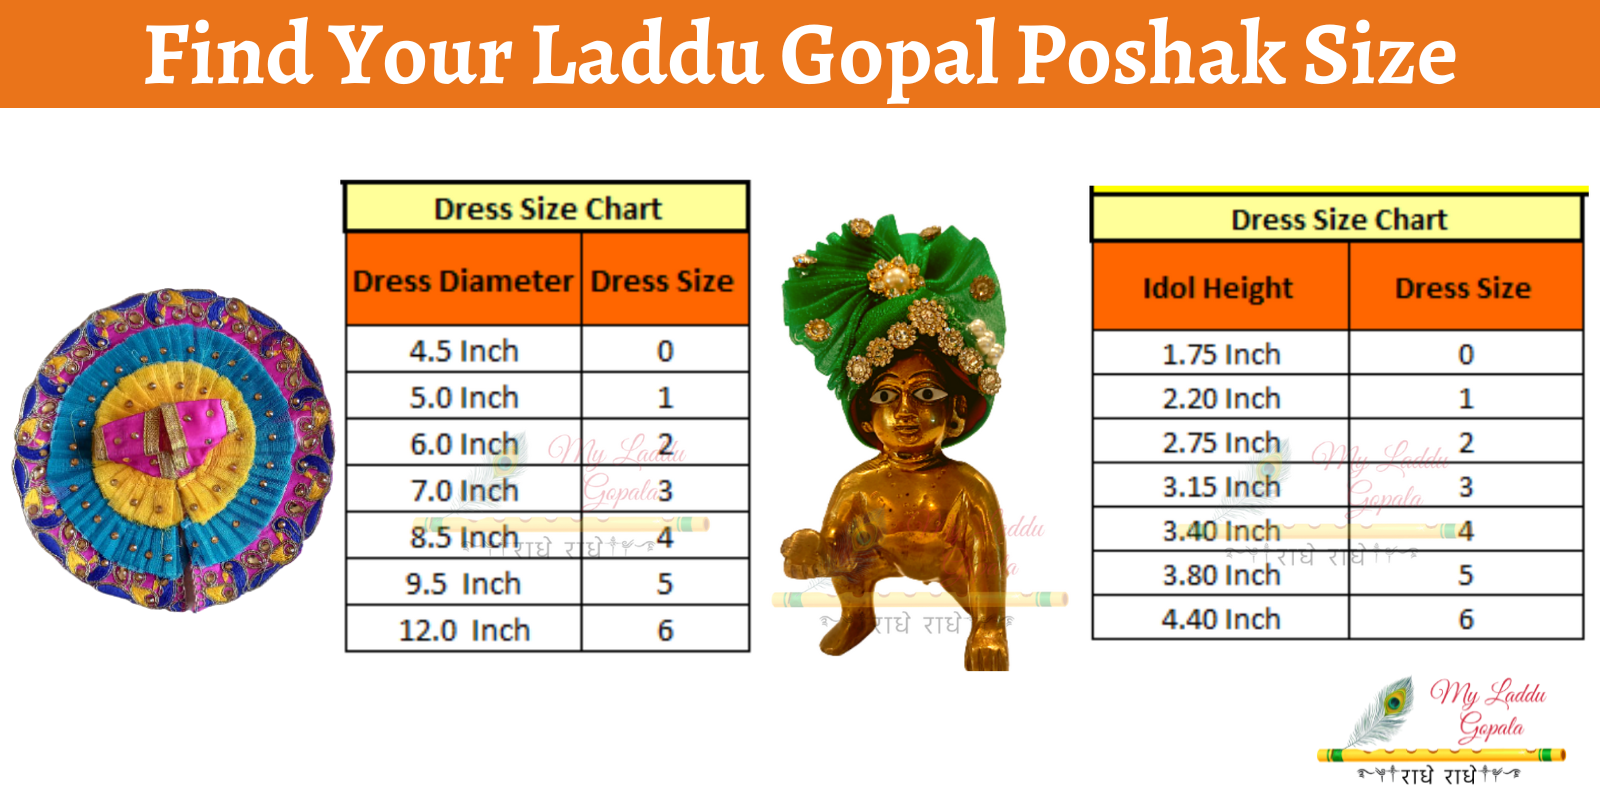 Laddu Gopal Fancy Poshak Dress For Idol (0 to 2, Assorted) by Swastika  Price - Buy Online at Best Price in India